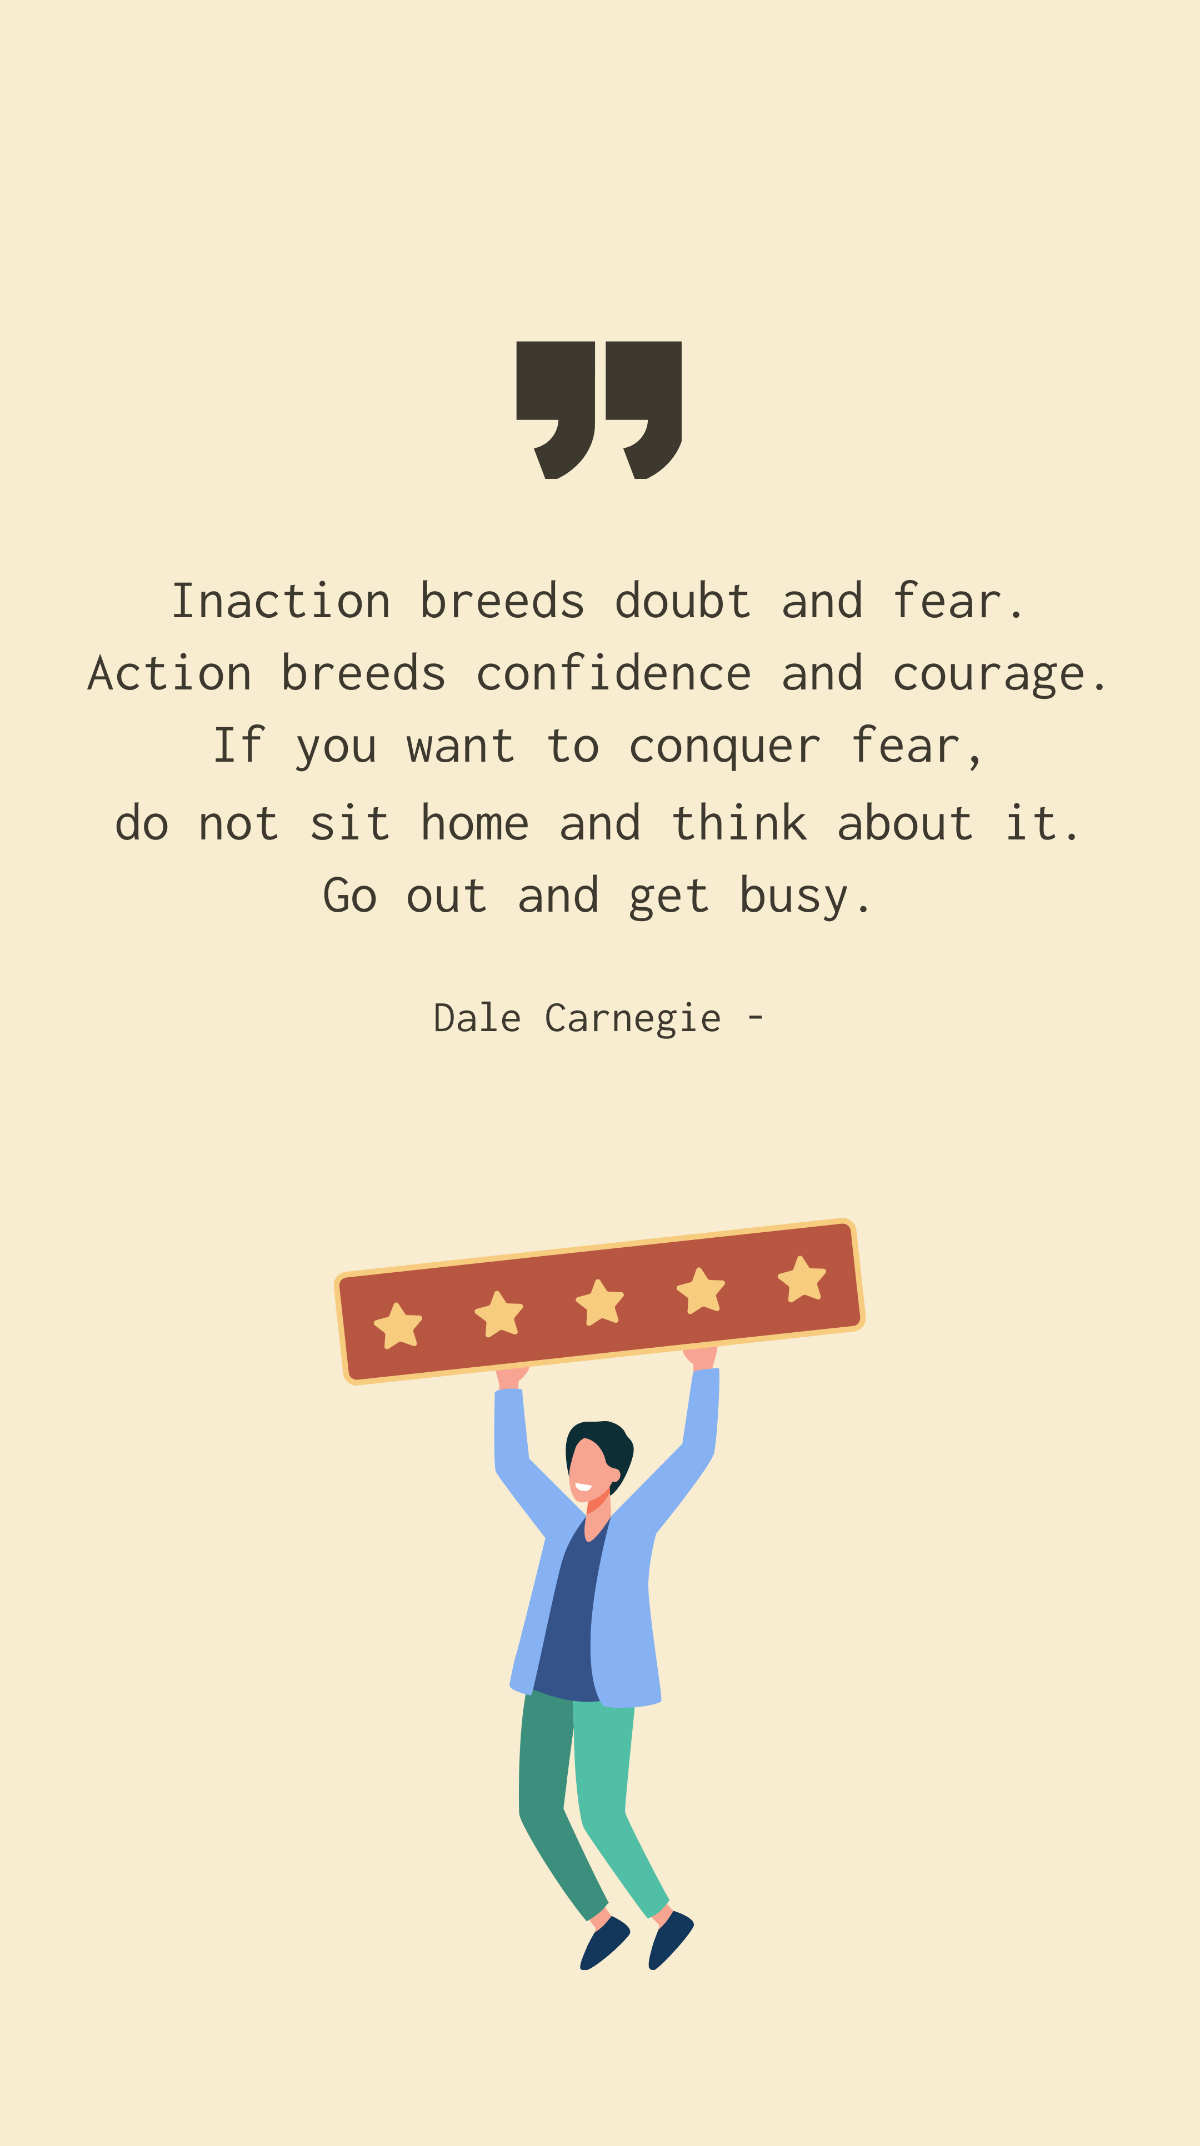 Free Dale Carnegie - Inaction breeds doubt and fear. Action breeds confidence and courage. If you want to conquer fear, do not sit home and think about it. Go out and get busy. Template